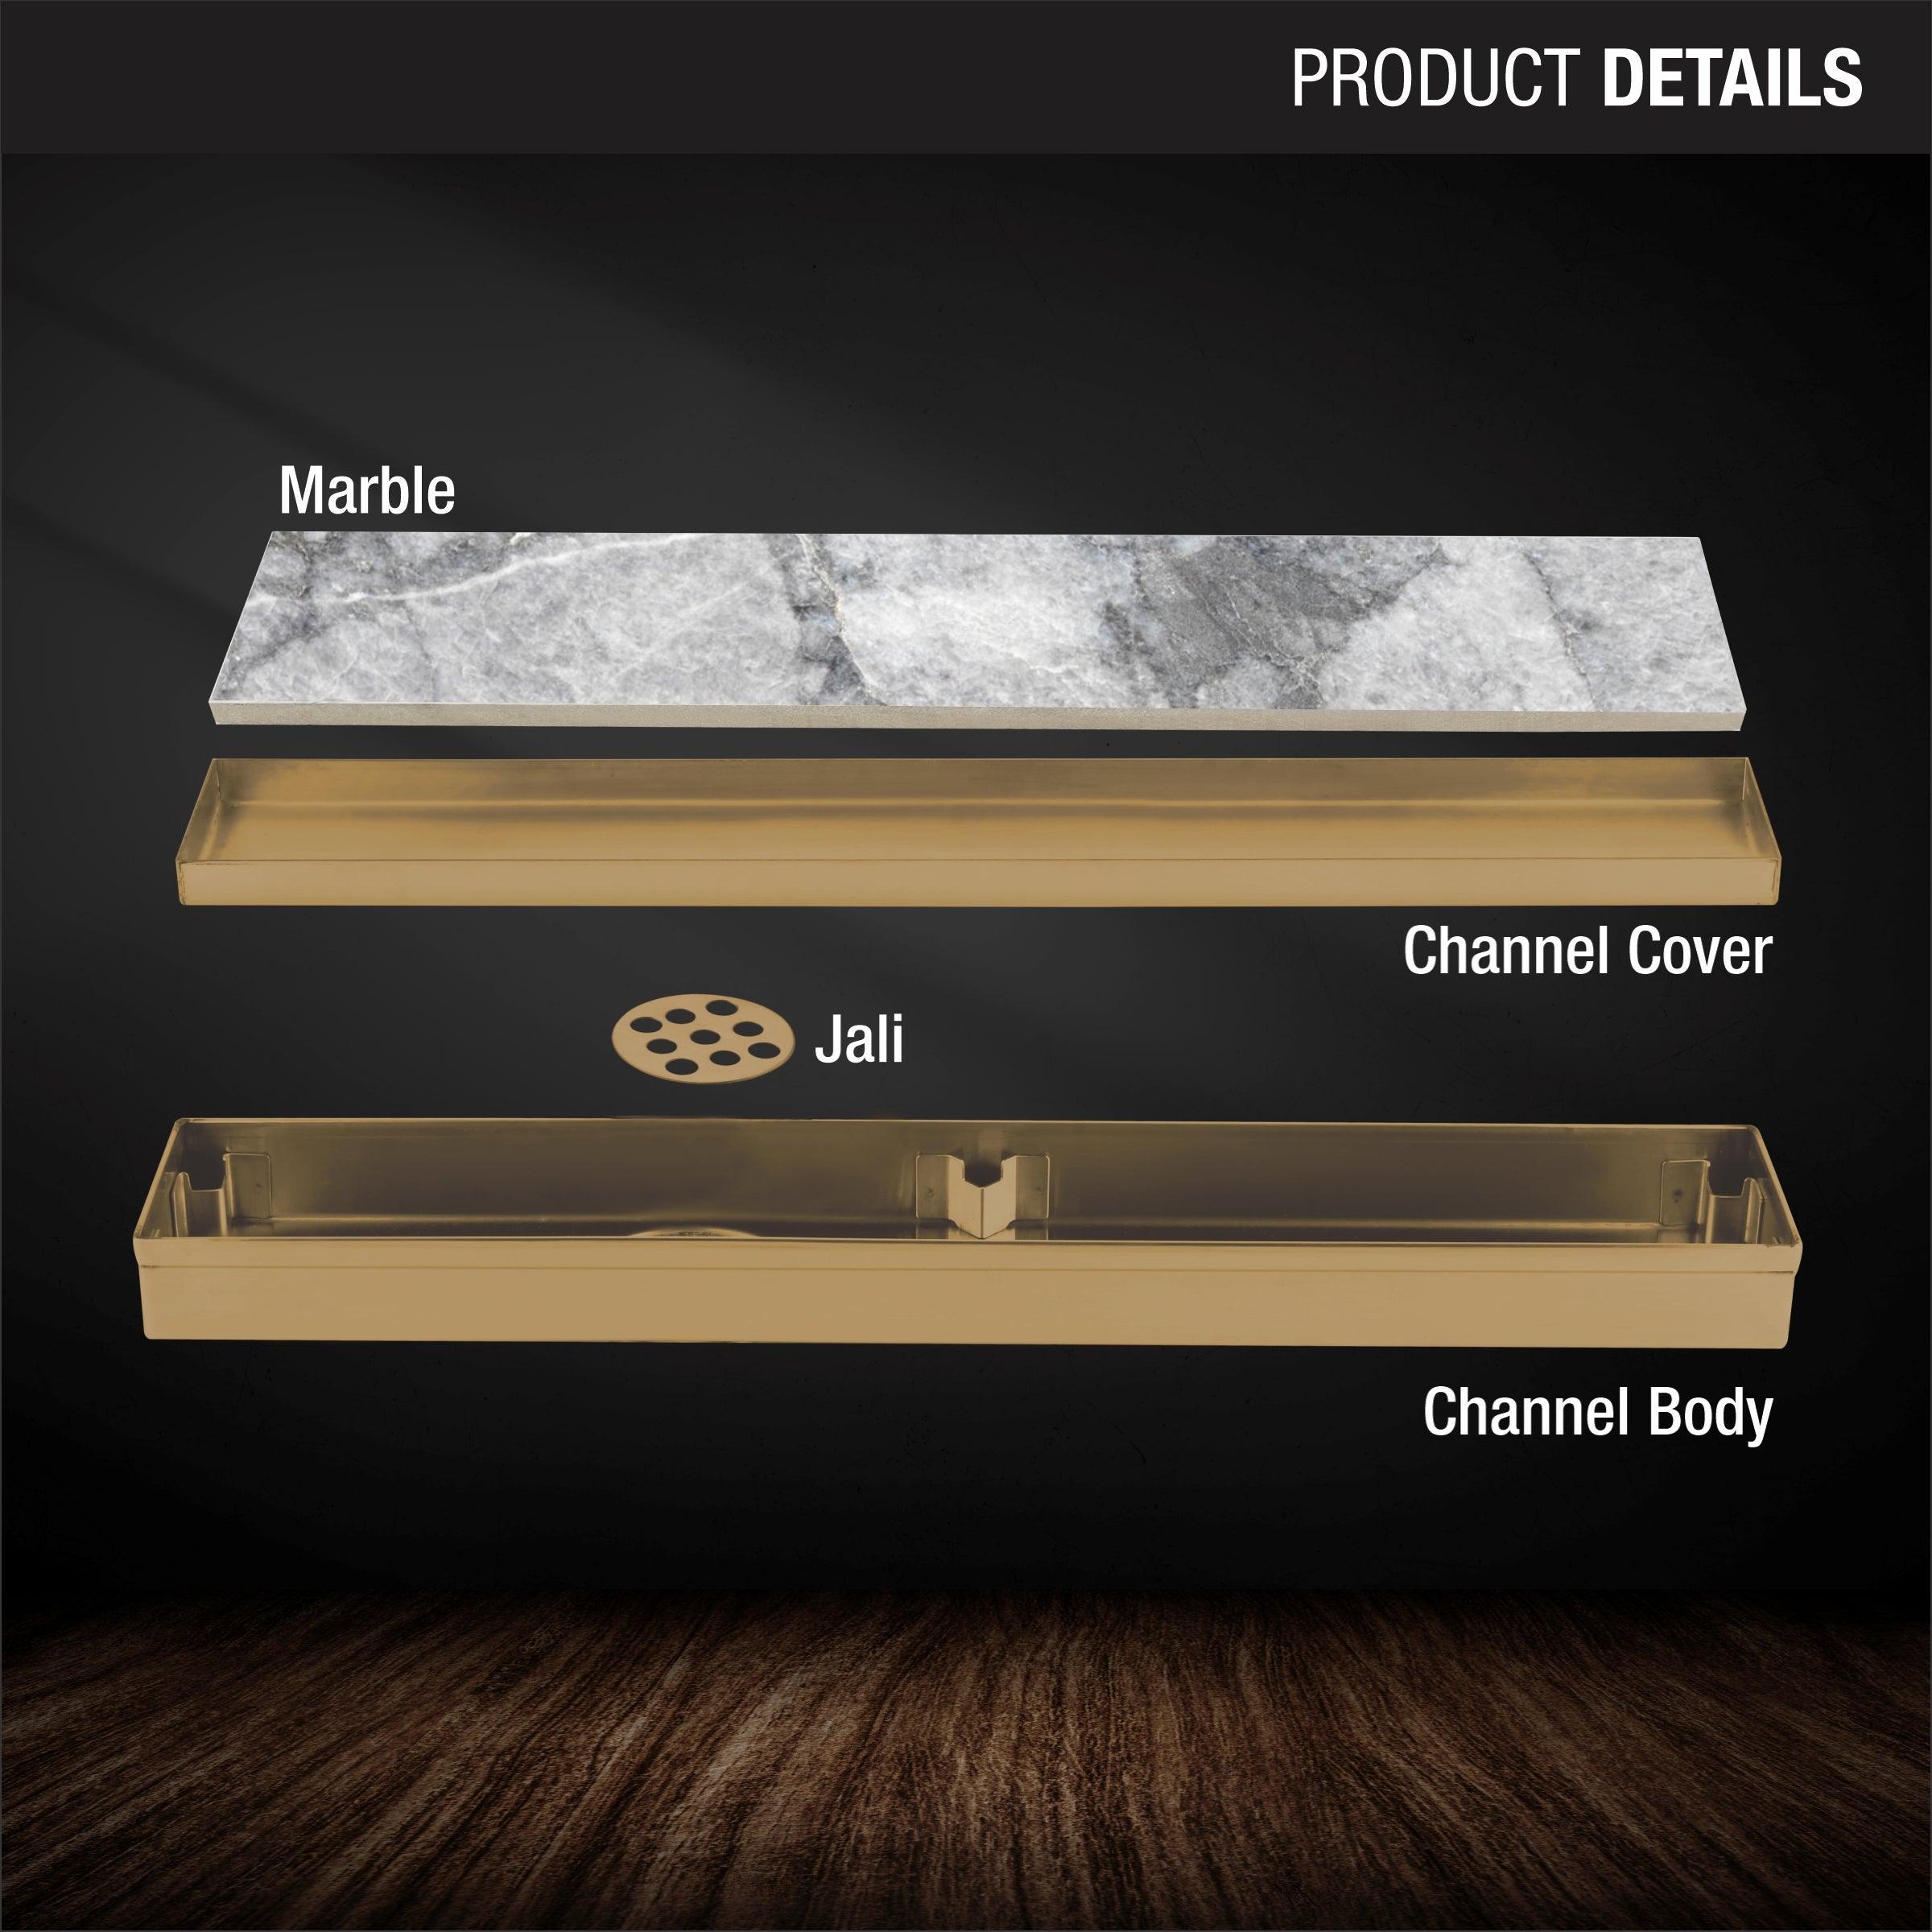 Marble Insert Shower Drain Channel - Yellow Gold (32 x 2 Inches) product details